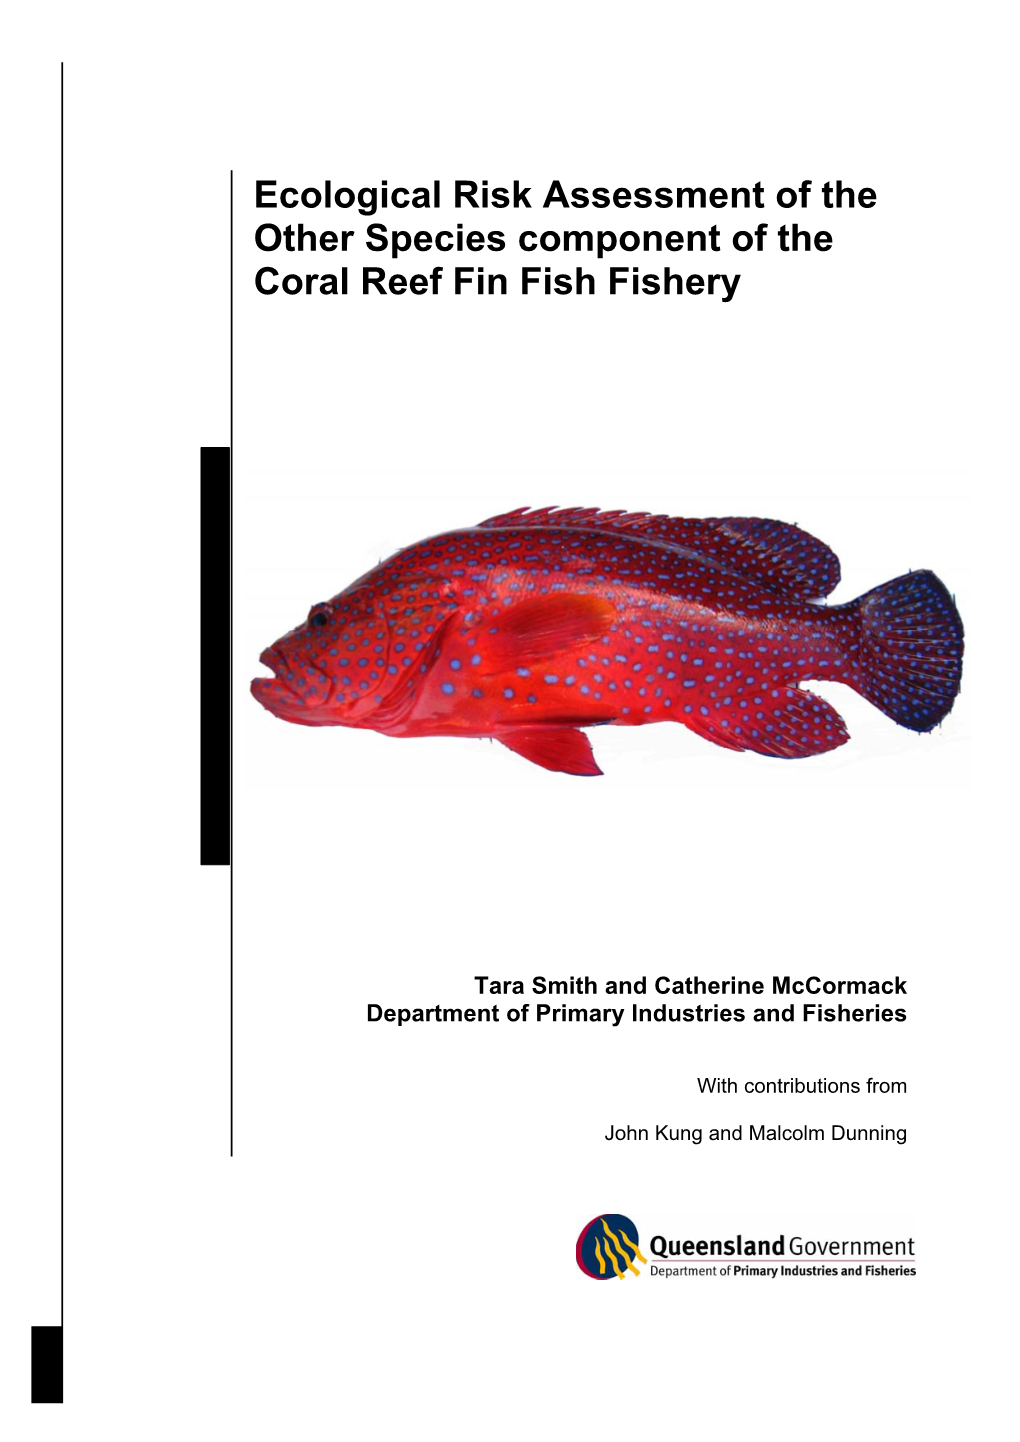 Ecological Risk Assessment of the Other Species Component of the Coral Reef Fin Fish Fishery